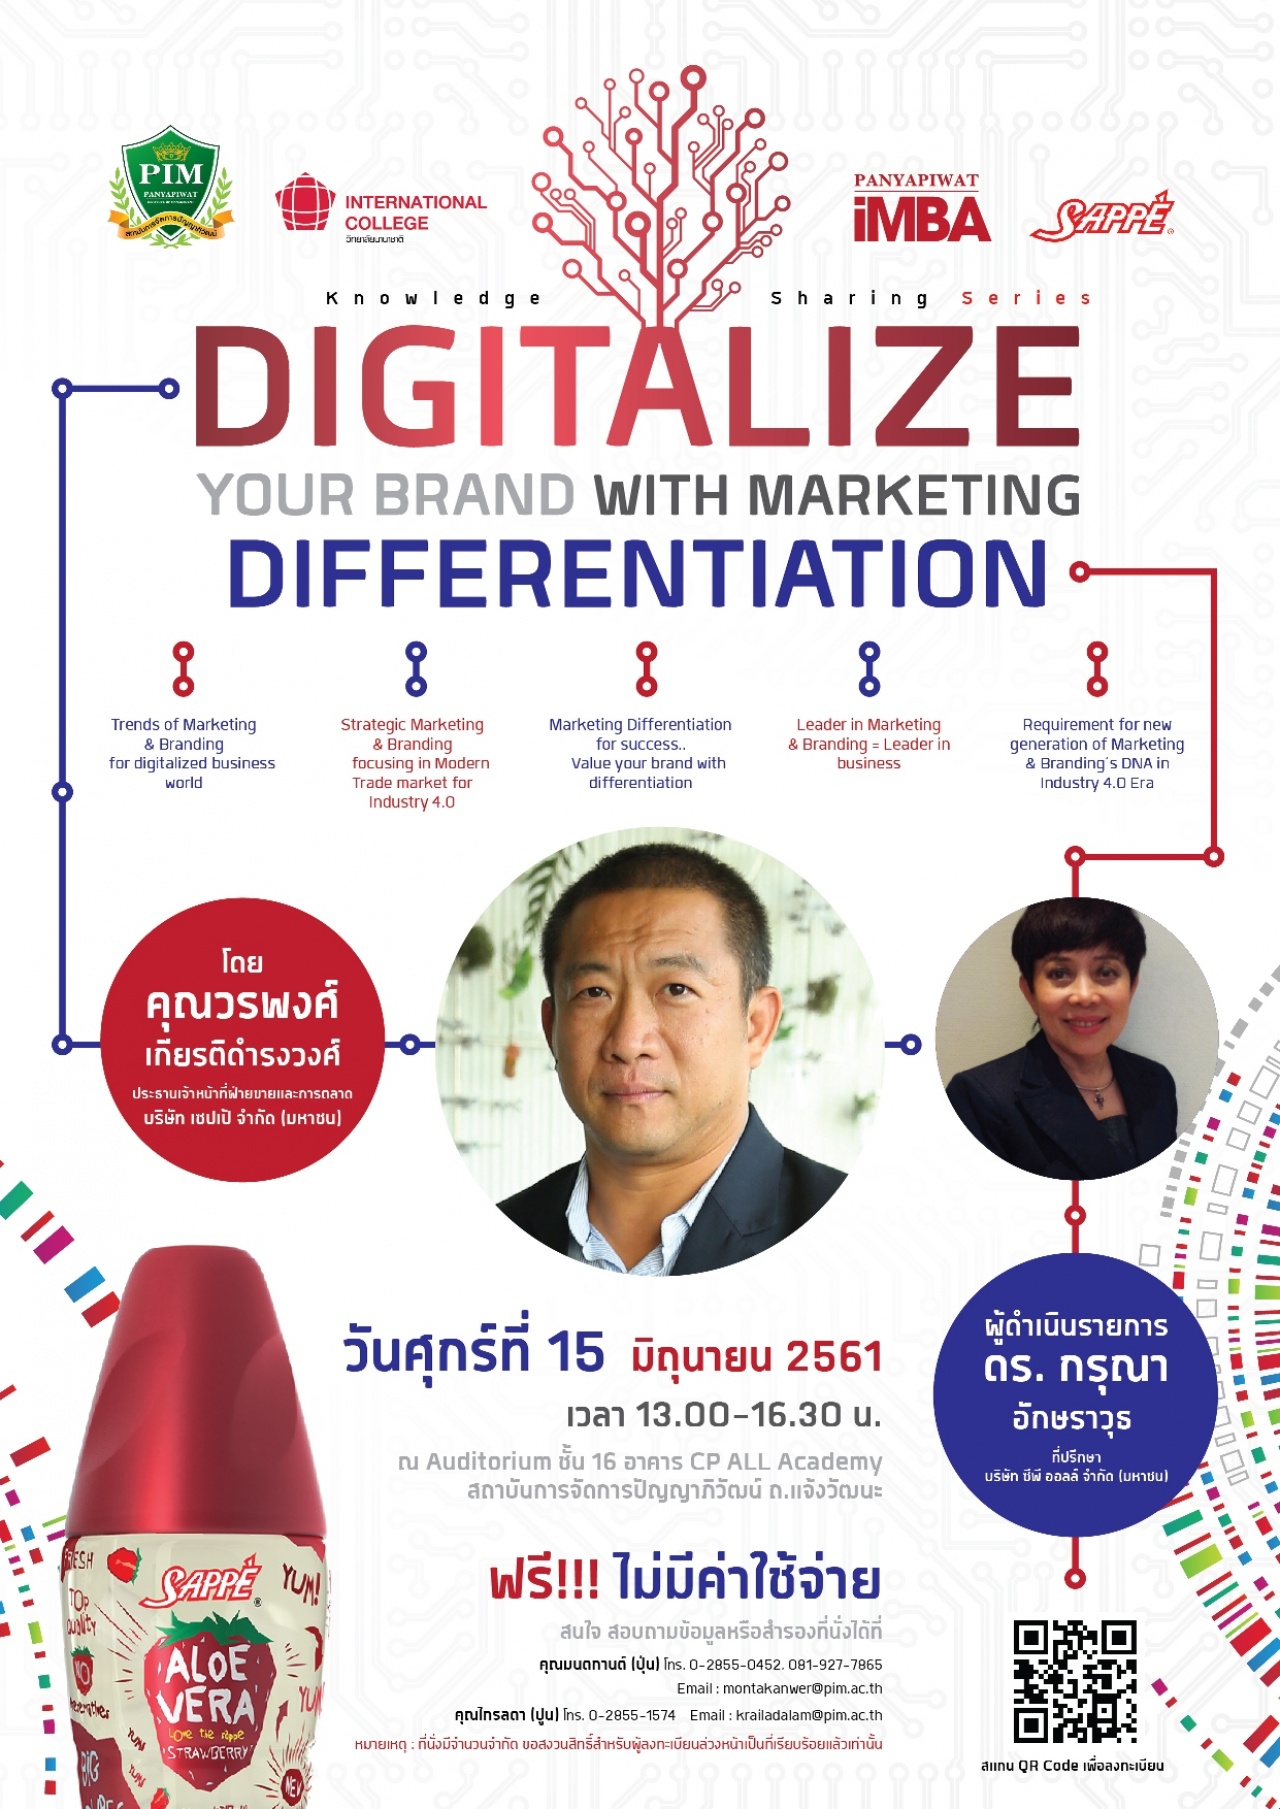 Knowledge Sharing ในหัวข้อ “Digitalize your Brand with Marketing Differentiation”